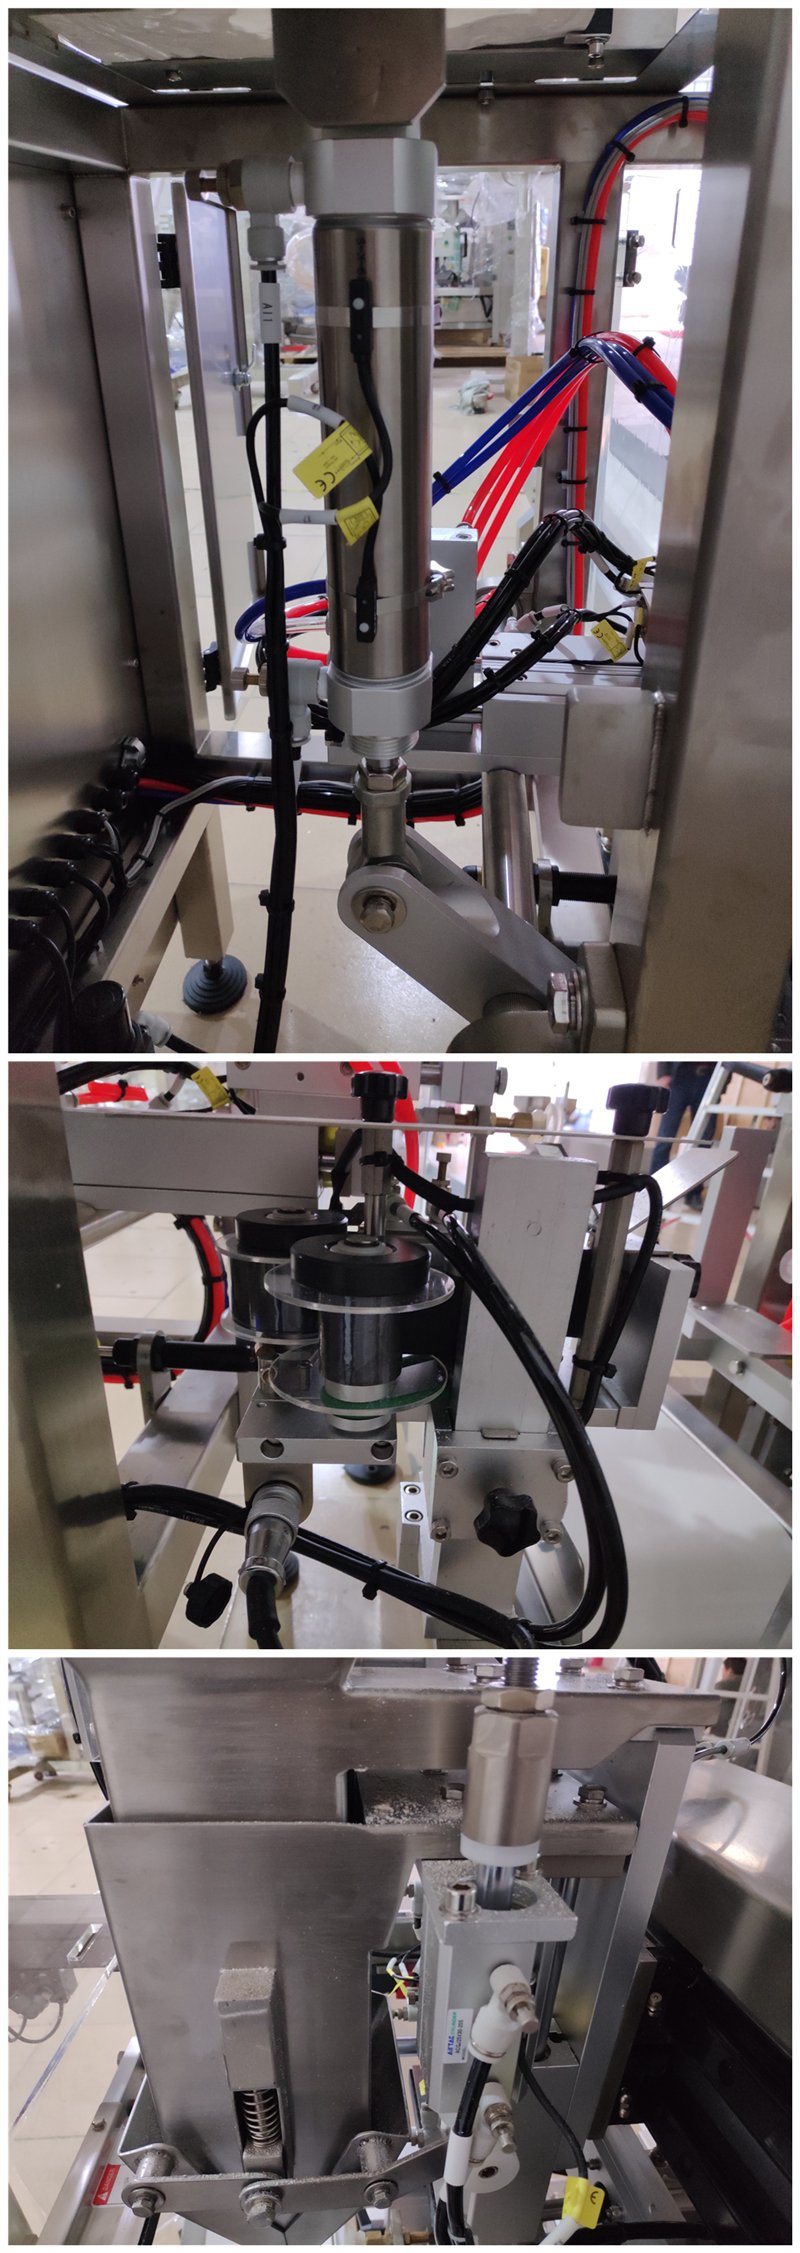 Packaging Machine for Premade Bags with Zipper